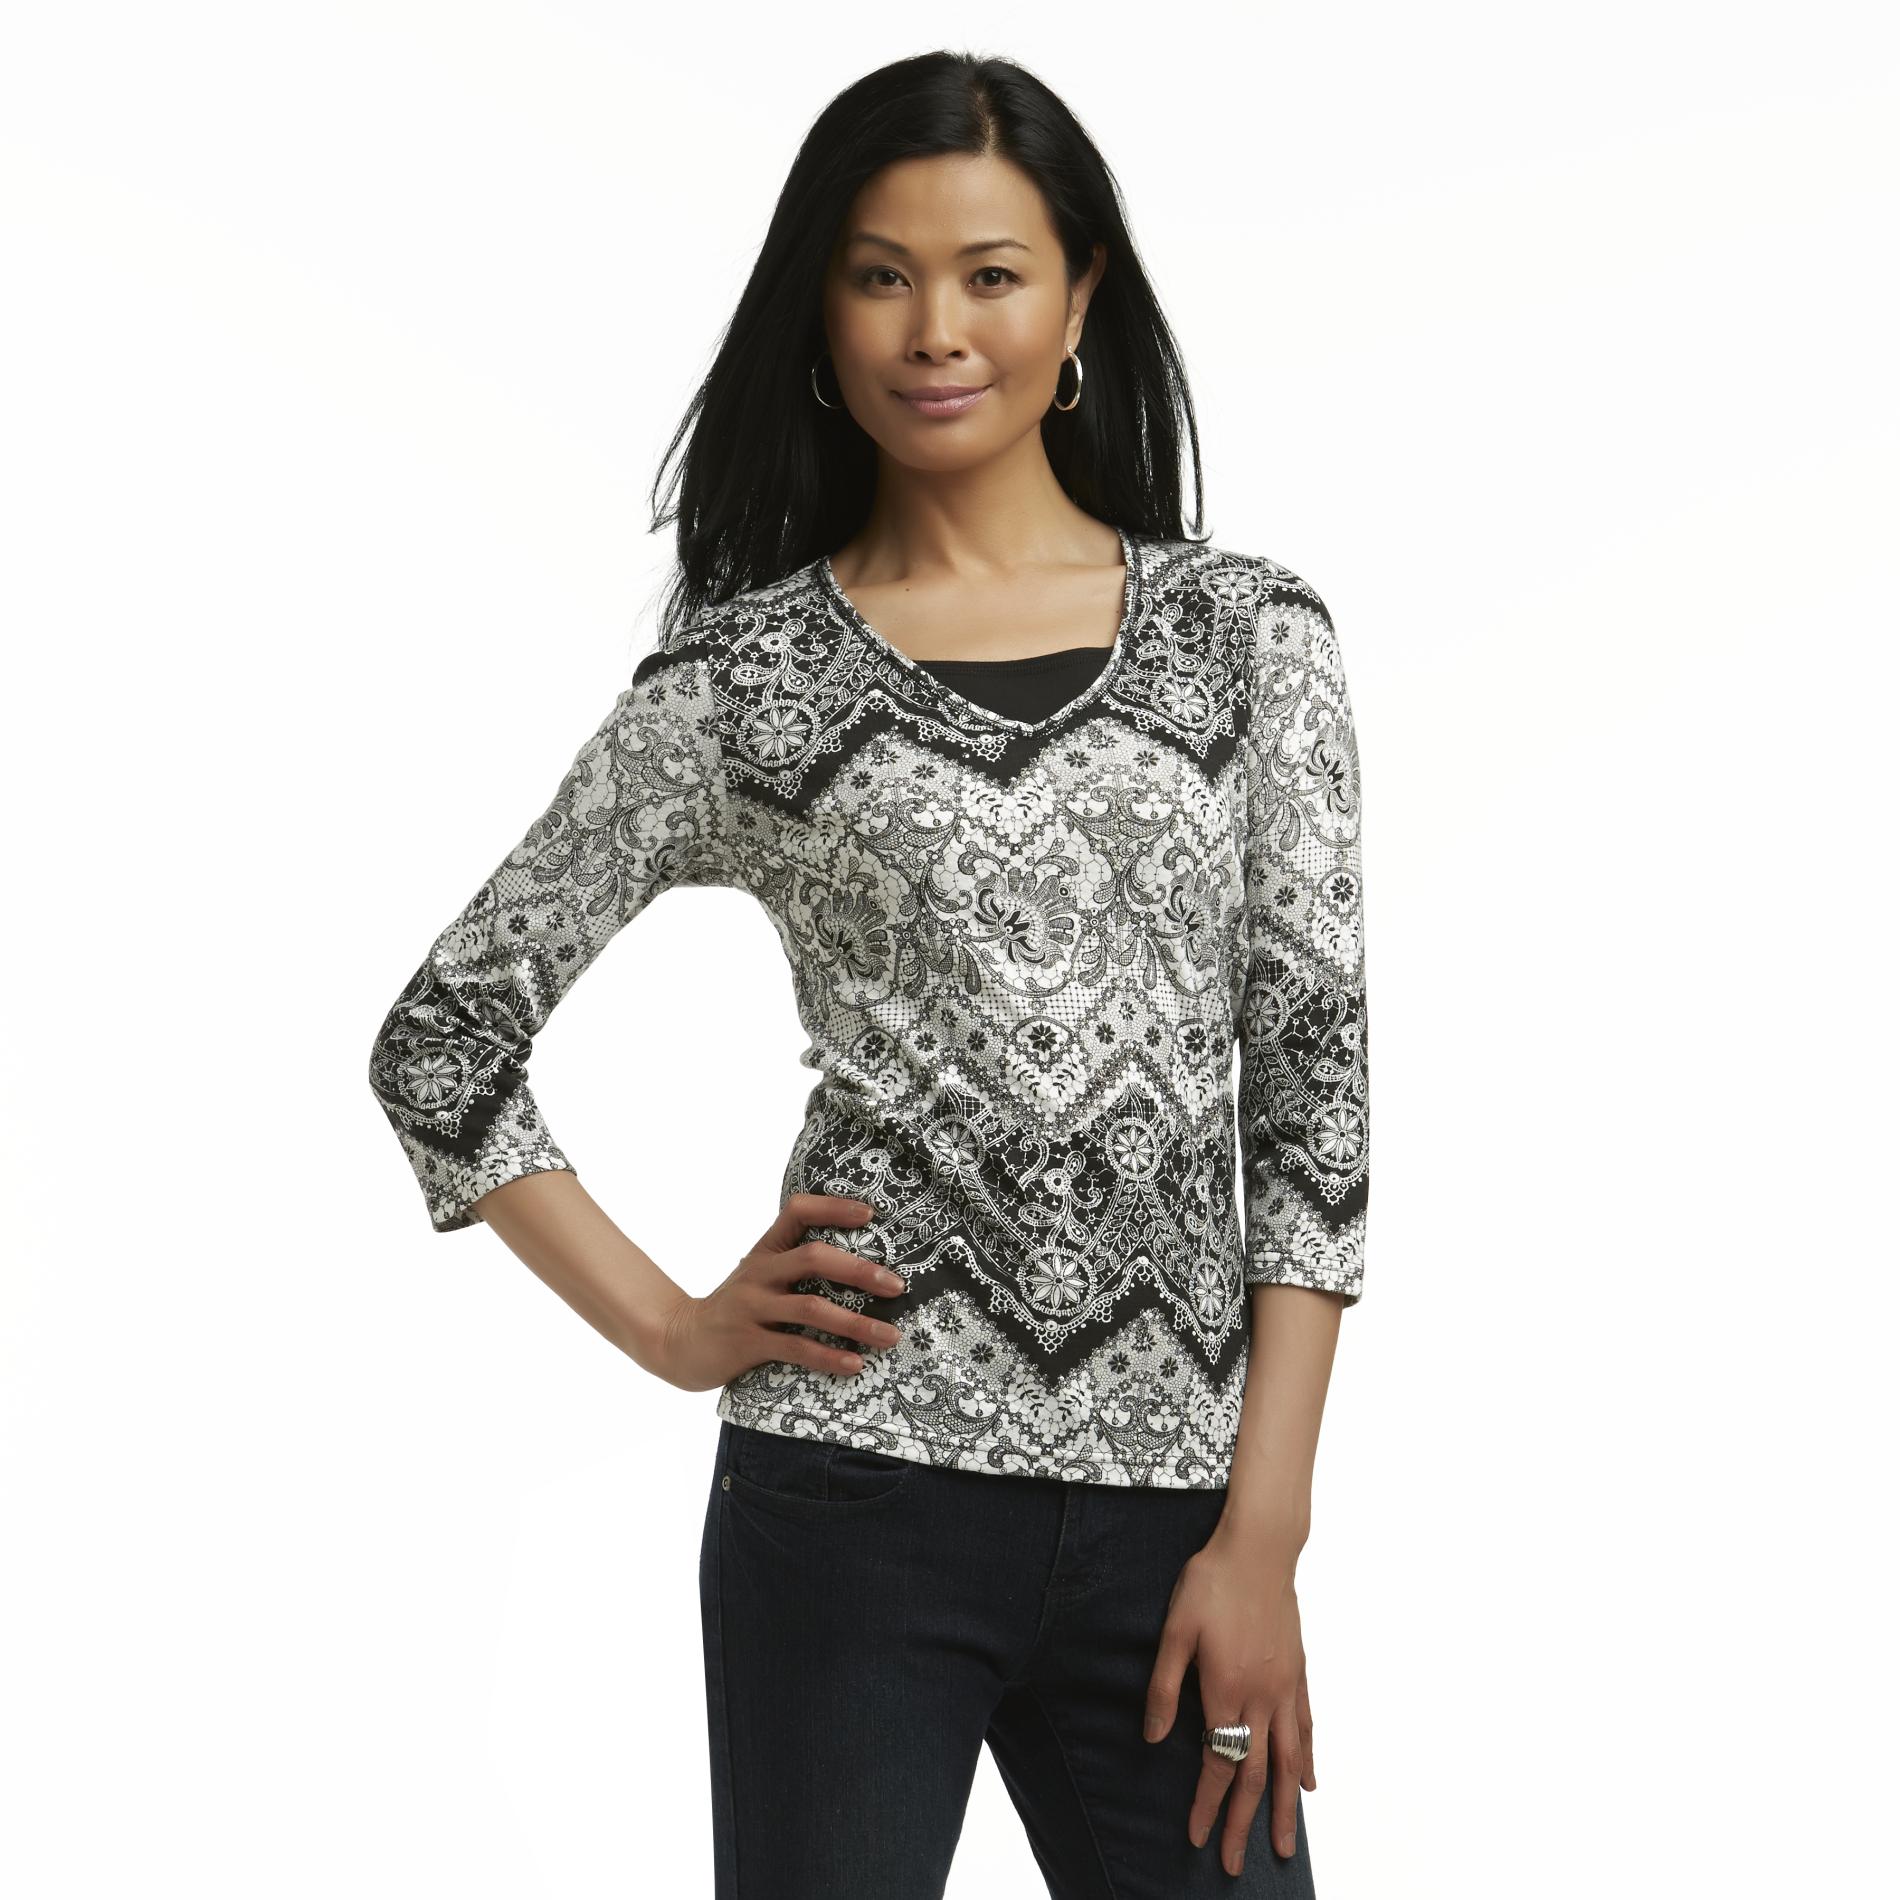 Basic Editions Women's Layered-Look Top - Abstract